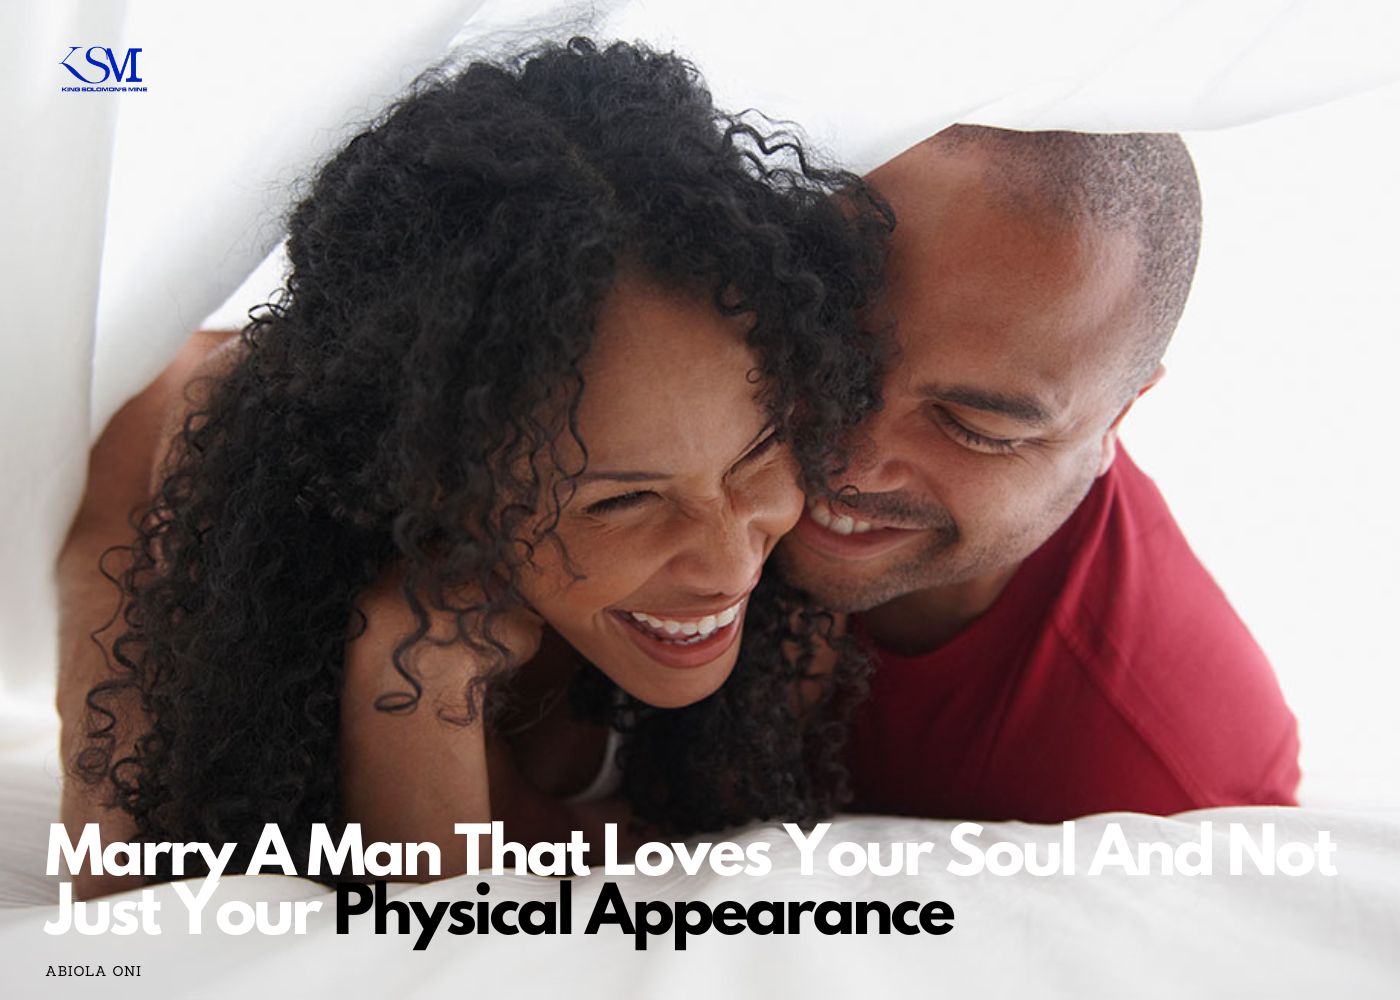 Marry A Man That Loves Your Soul And Not Just Your Physical Appearance